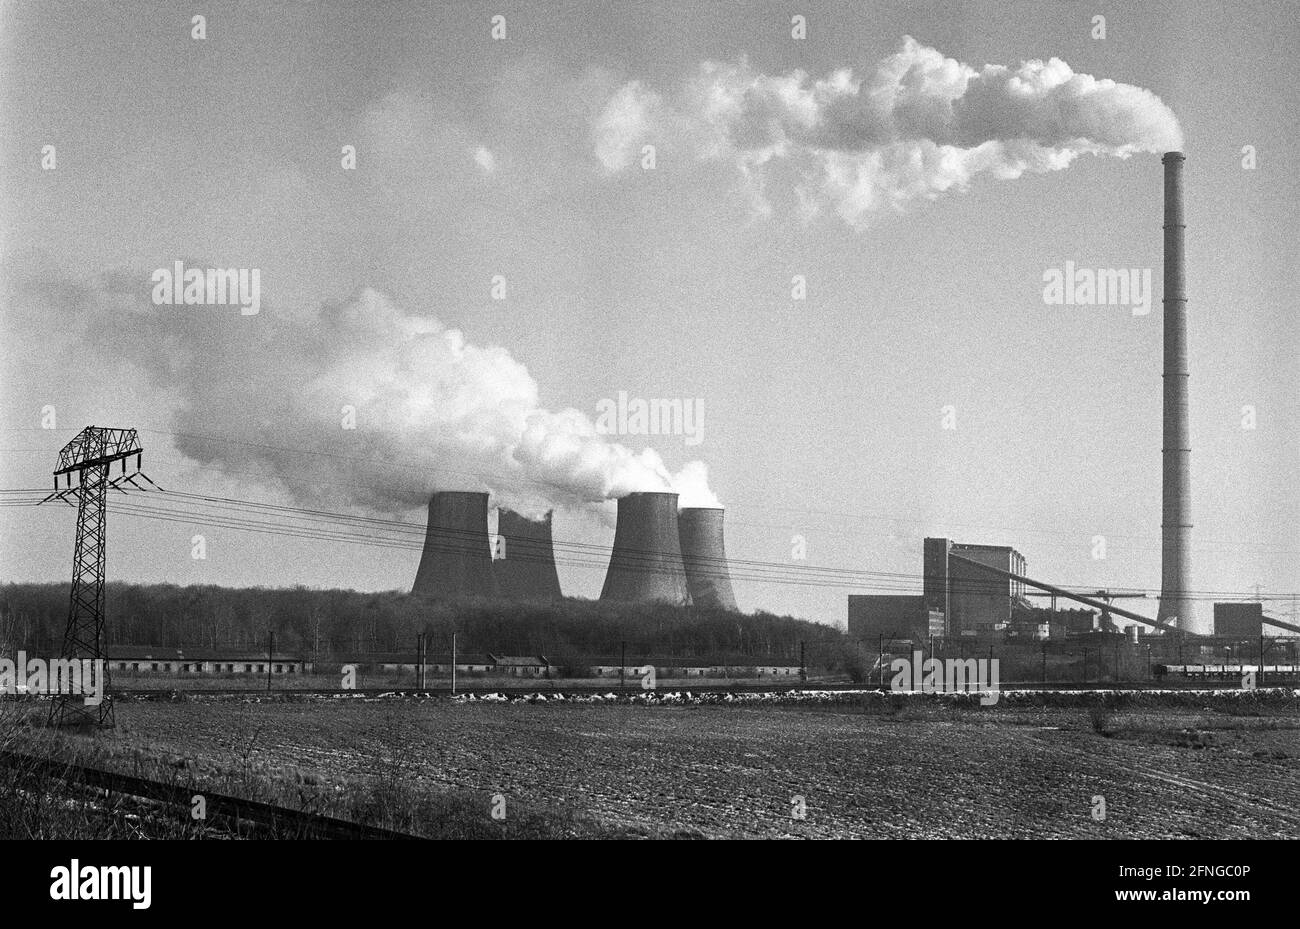 Germany, Espenhain, 07.01.1990. Archive-No.: 12-09-20 The Kombinat Espenhain (more precisely VEB Kombinat Espenhain) was a plant for the extraction and processing of brown coal. Photo: View of the plant [automated translation] Stock Photo